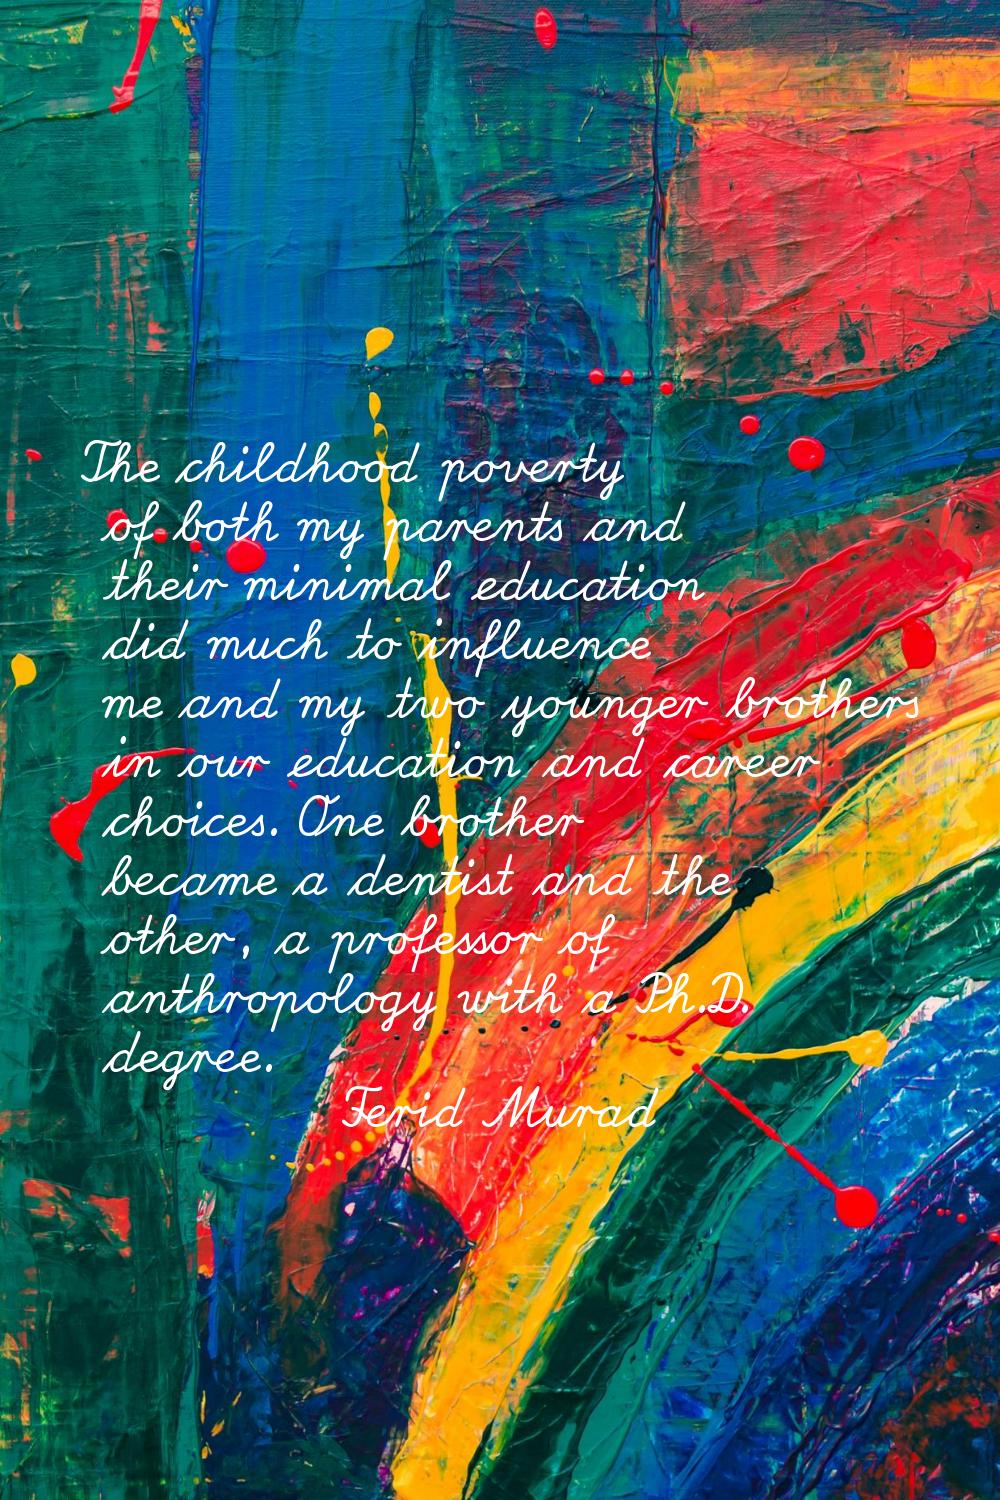 The childhood poverty of both my parents and their minimal education did much to influence me and m